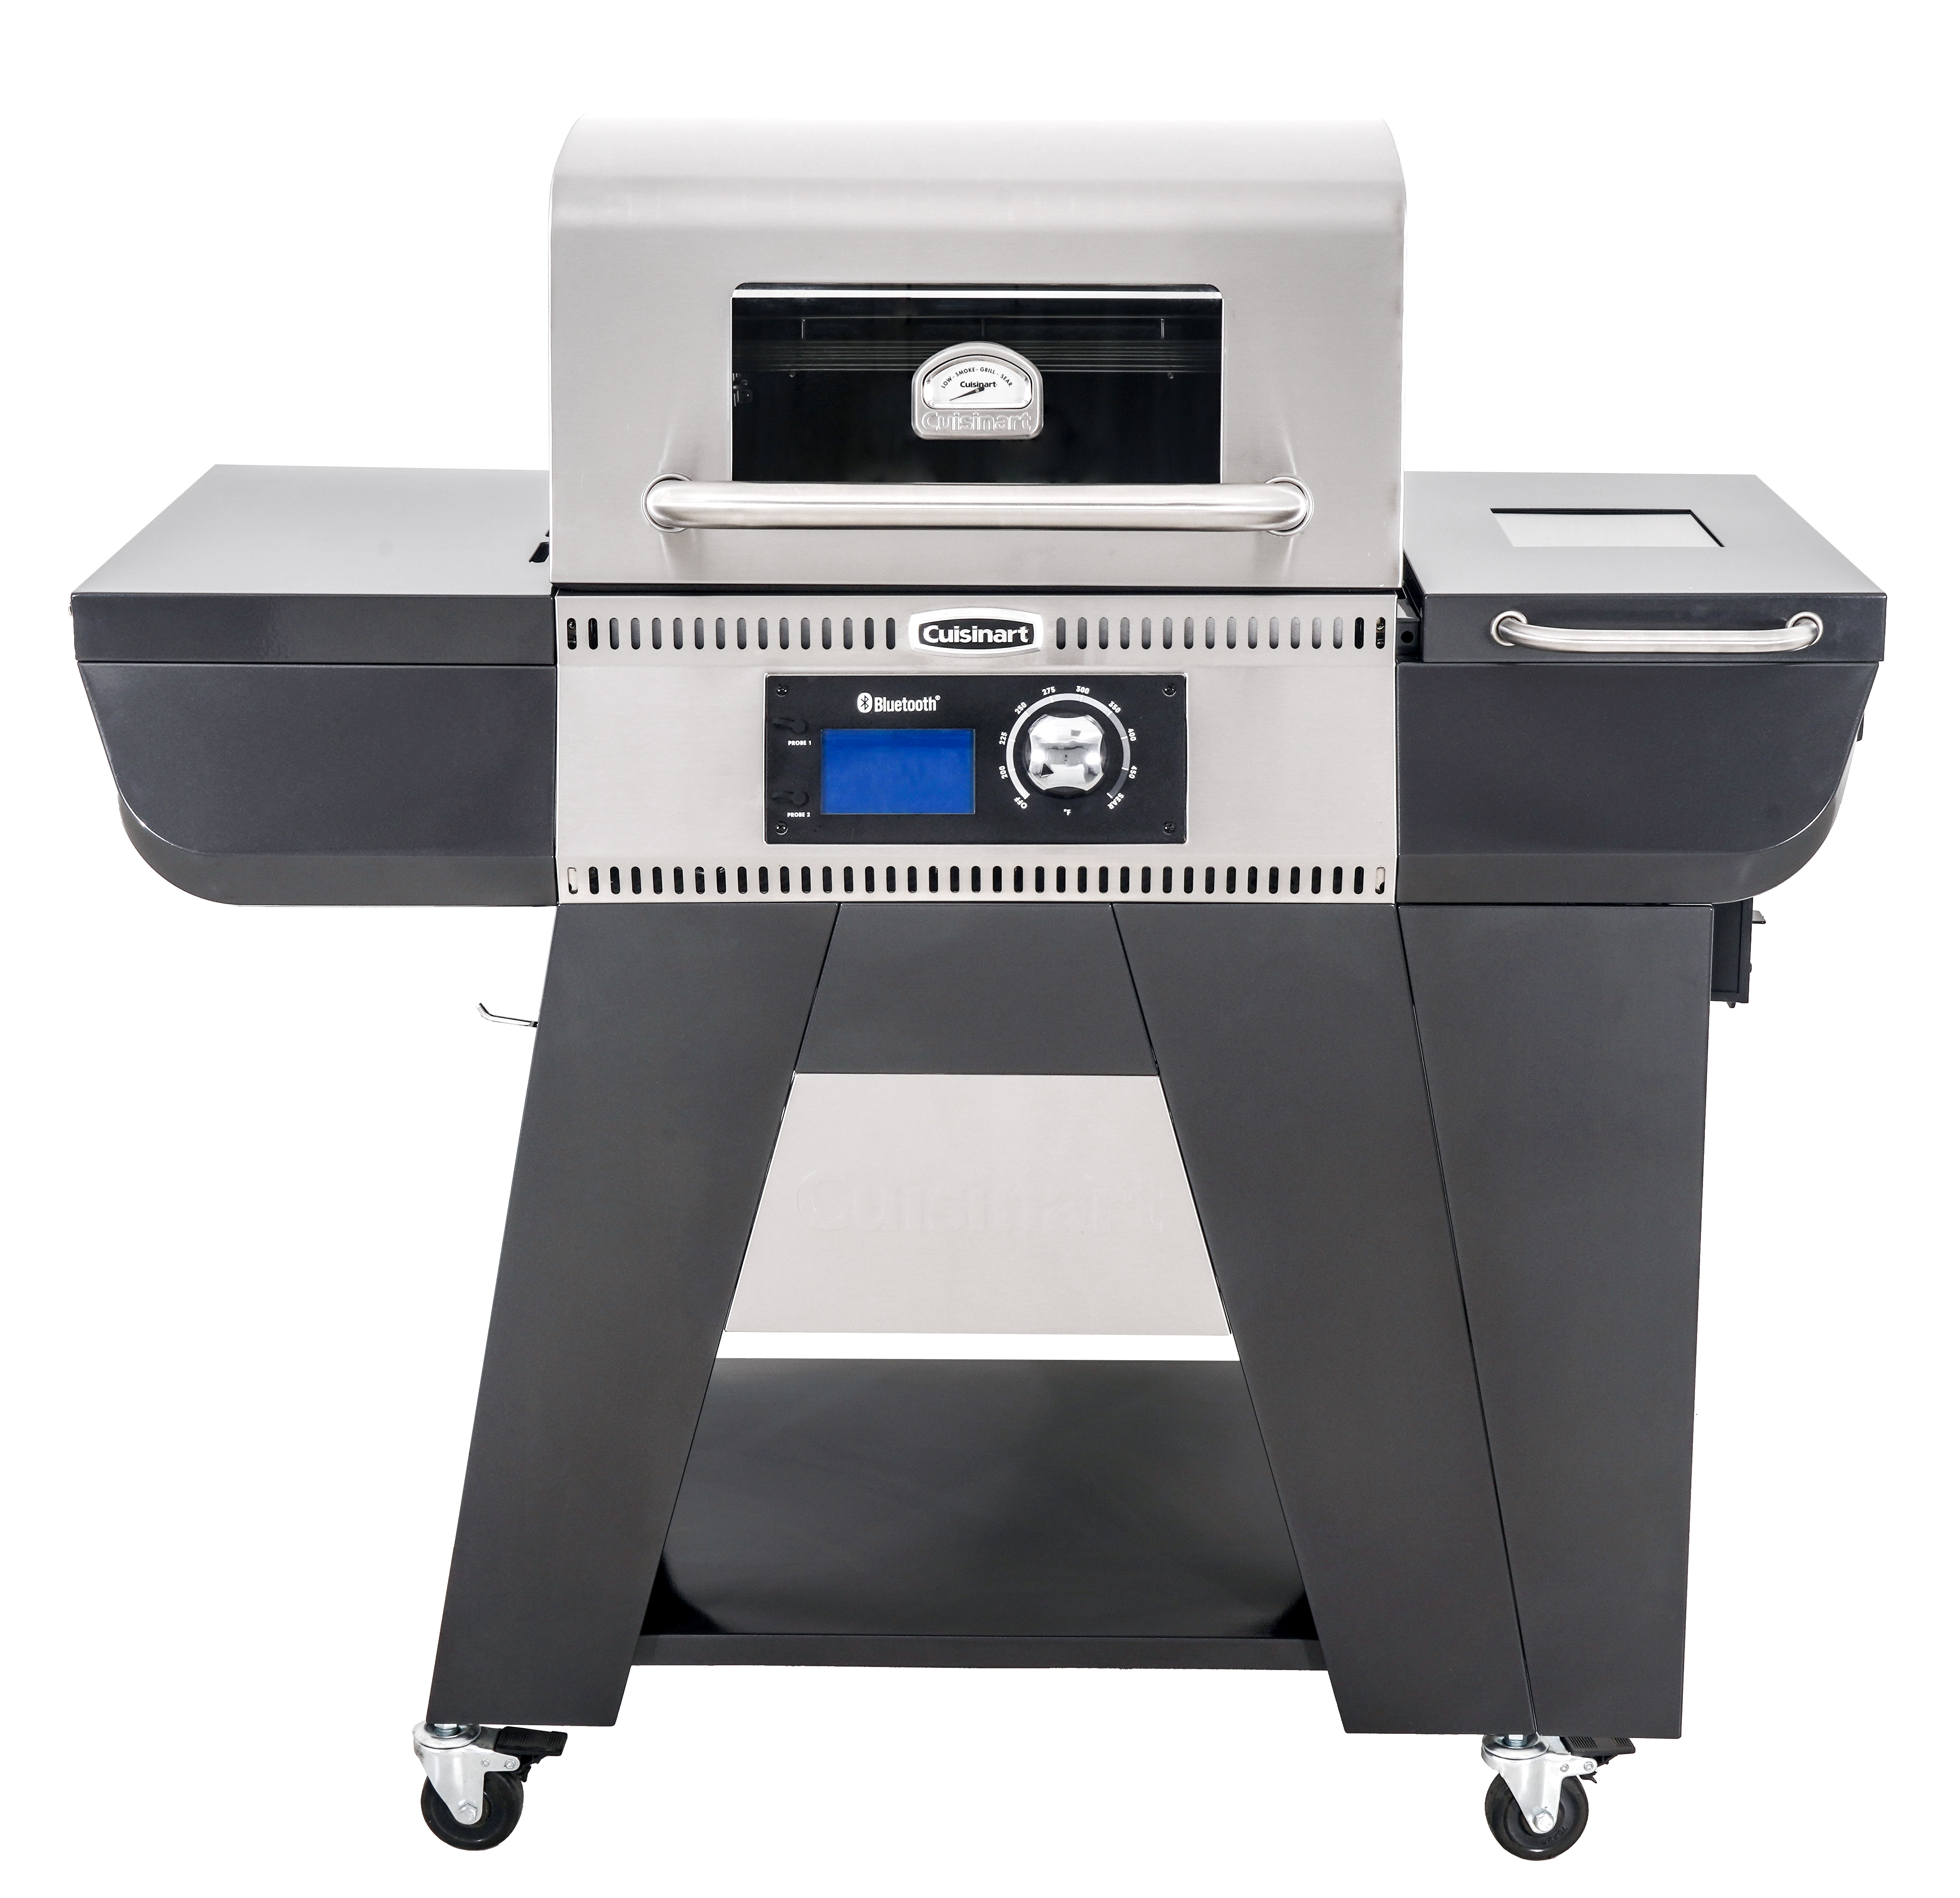 Cuisinart Bristol Bluetooth Connectivity Smoker and Pellet Grill - image 1 of 14